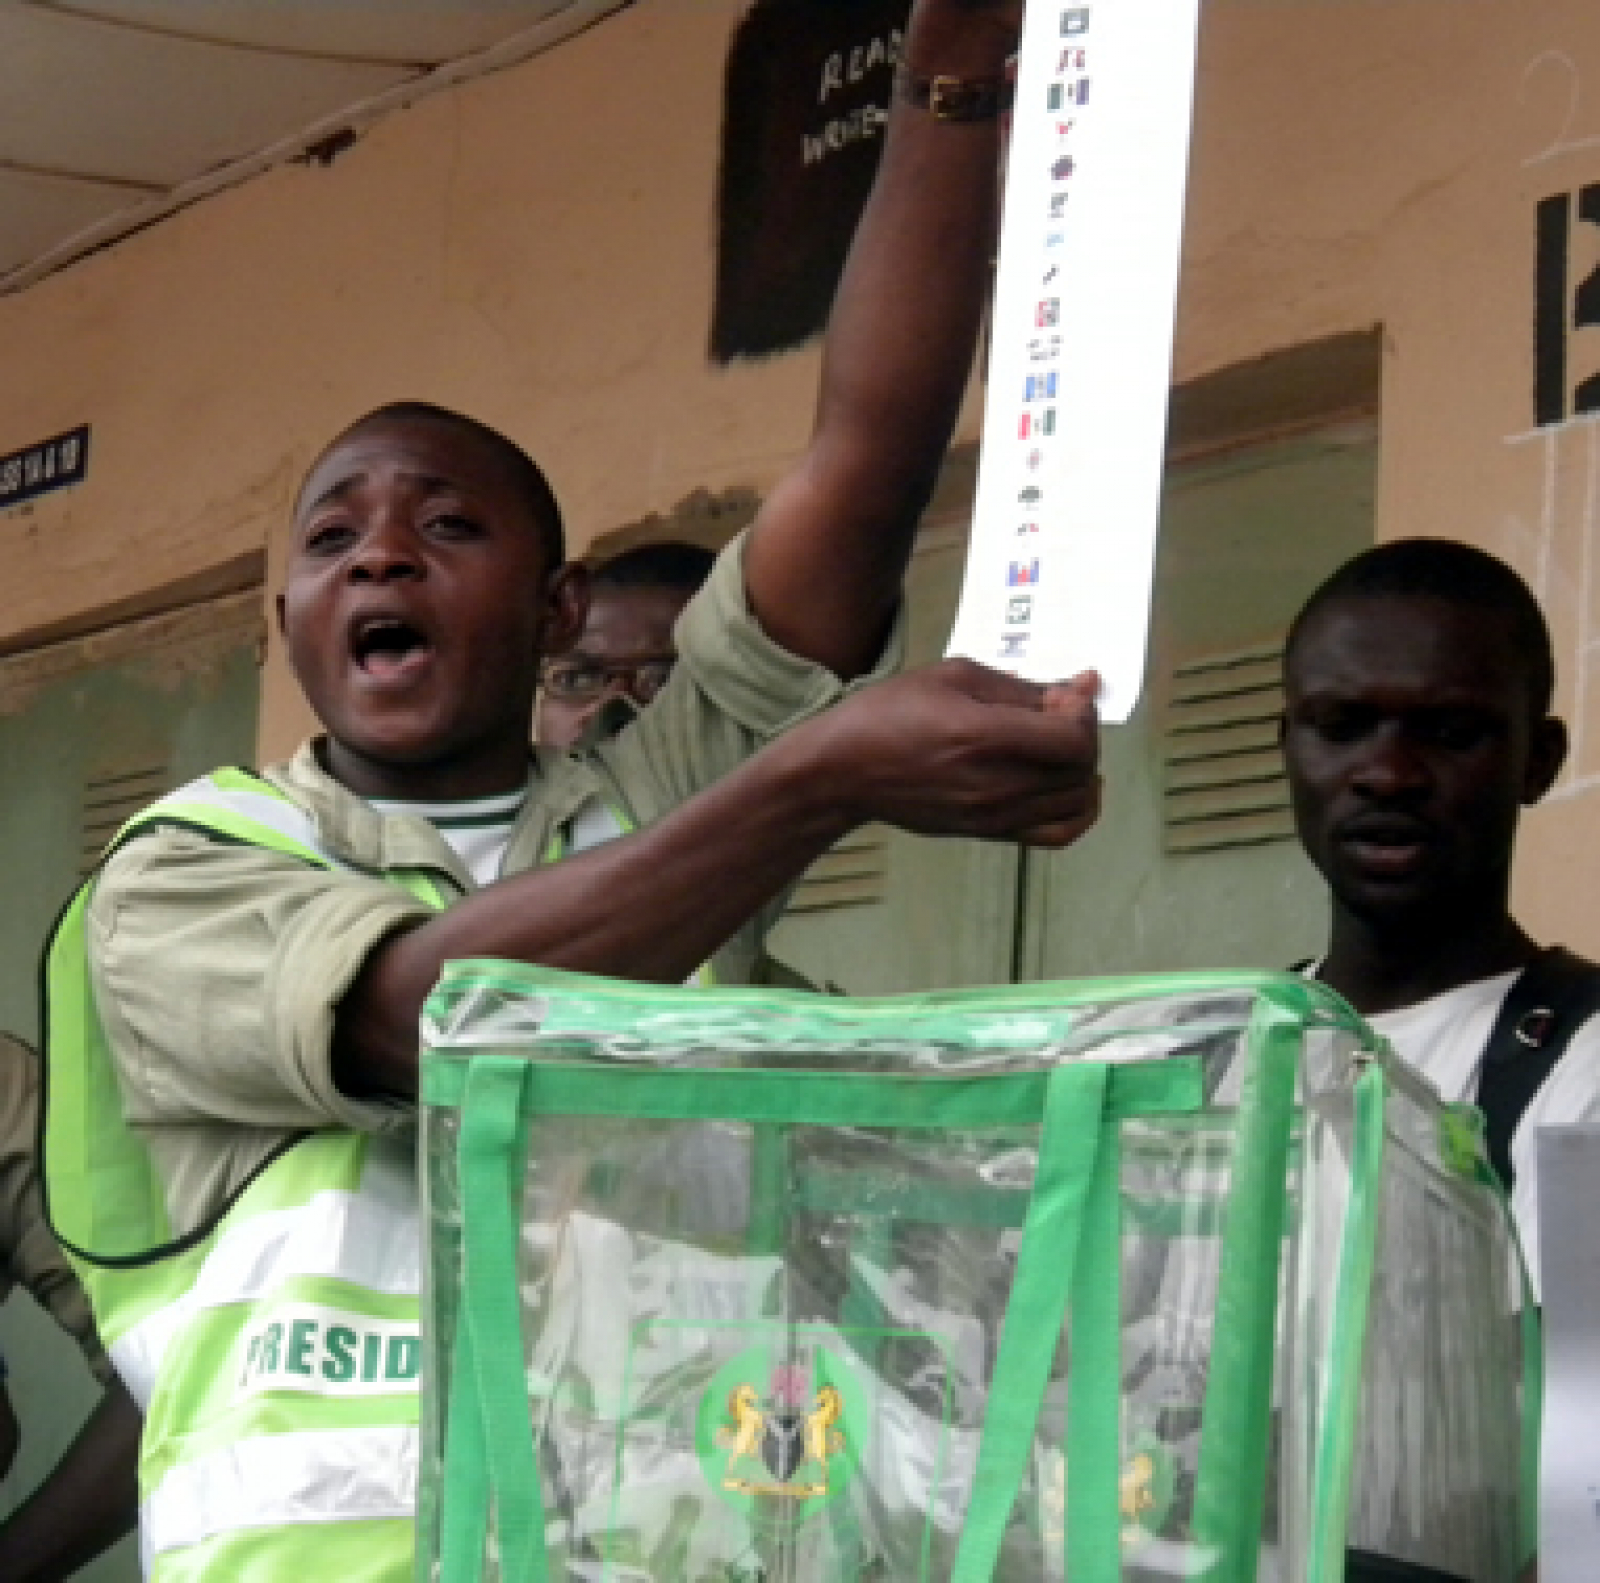 Despite Problems, National Assembly Elections Give Nigerians a Real Chance to Vote, NDI Mission Finds